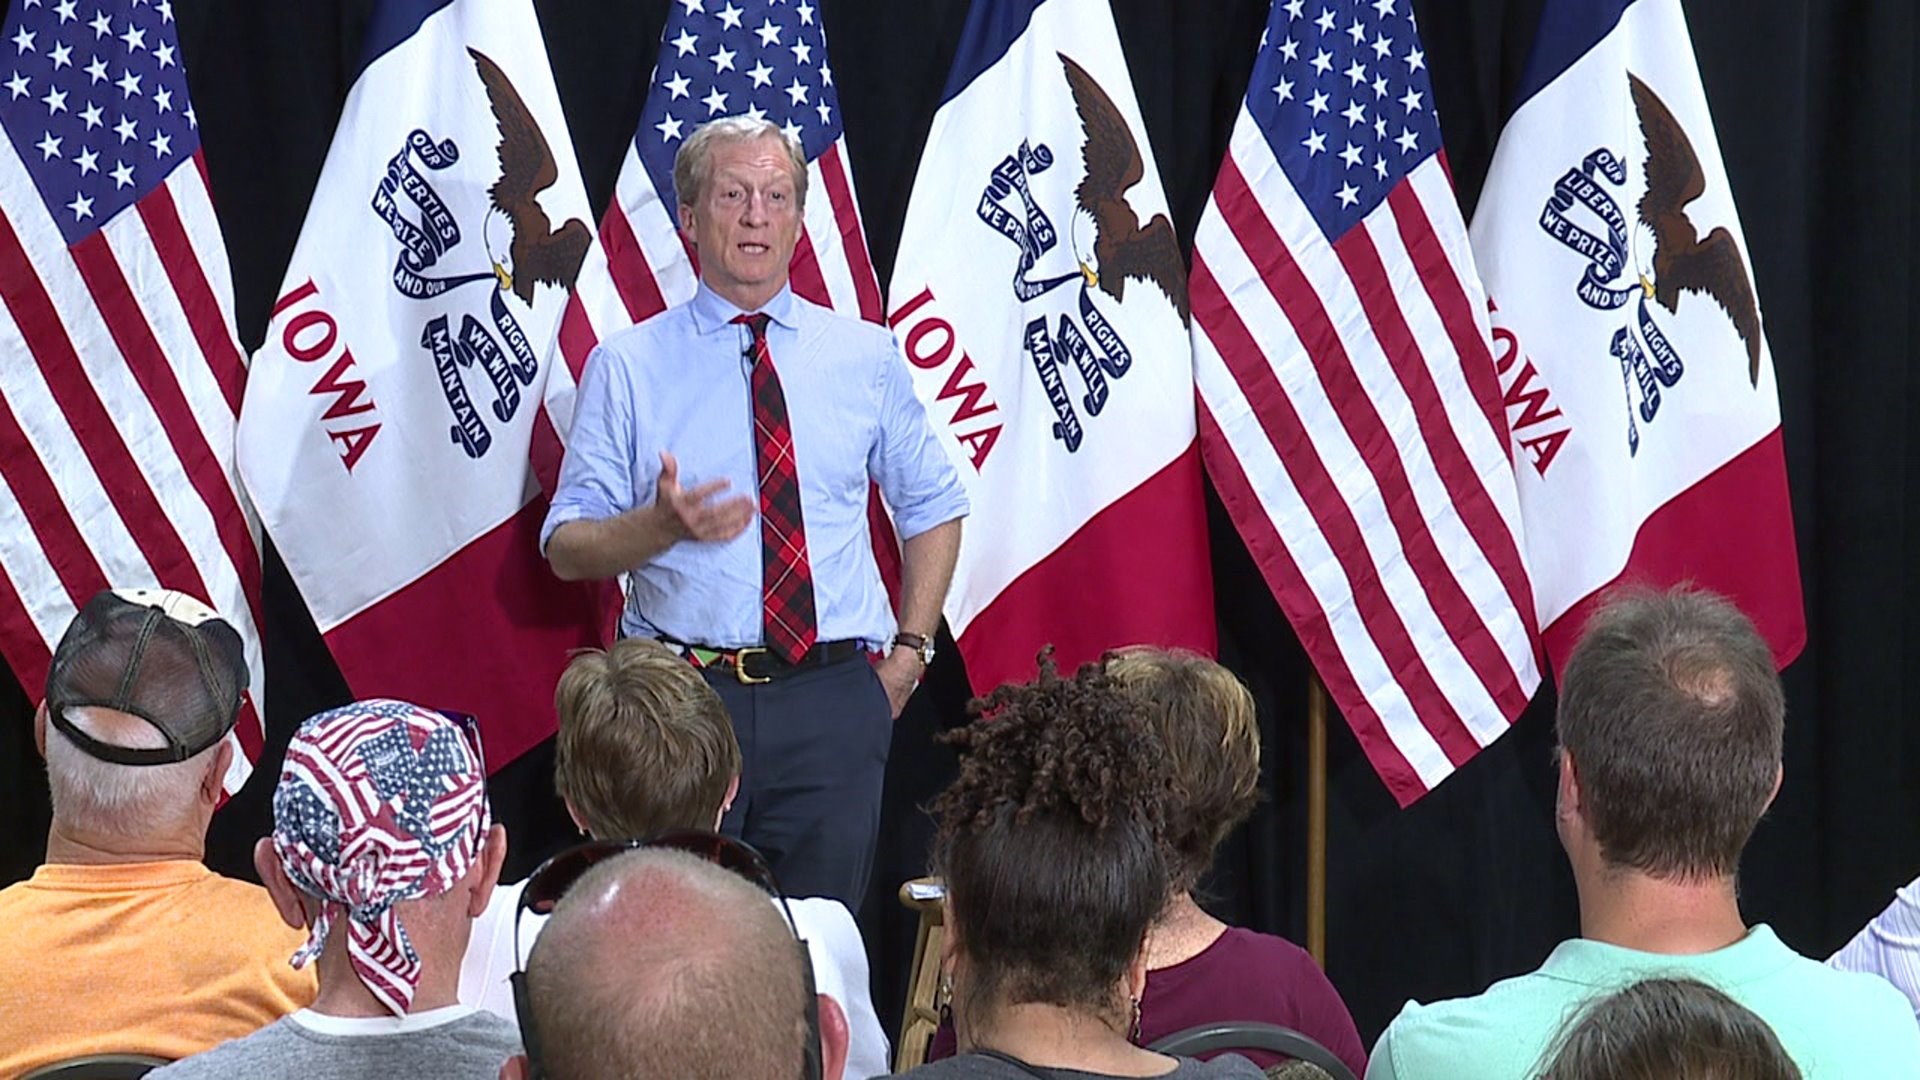 Tom Steyer campaigns in Davenport